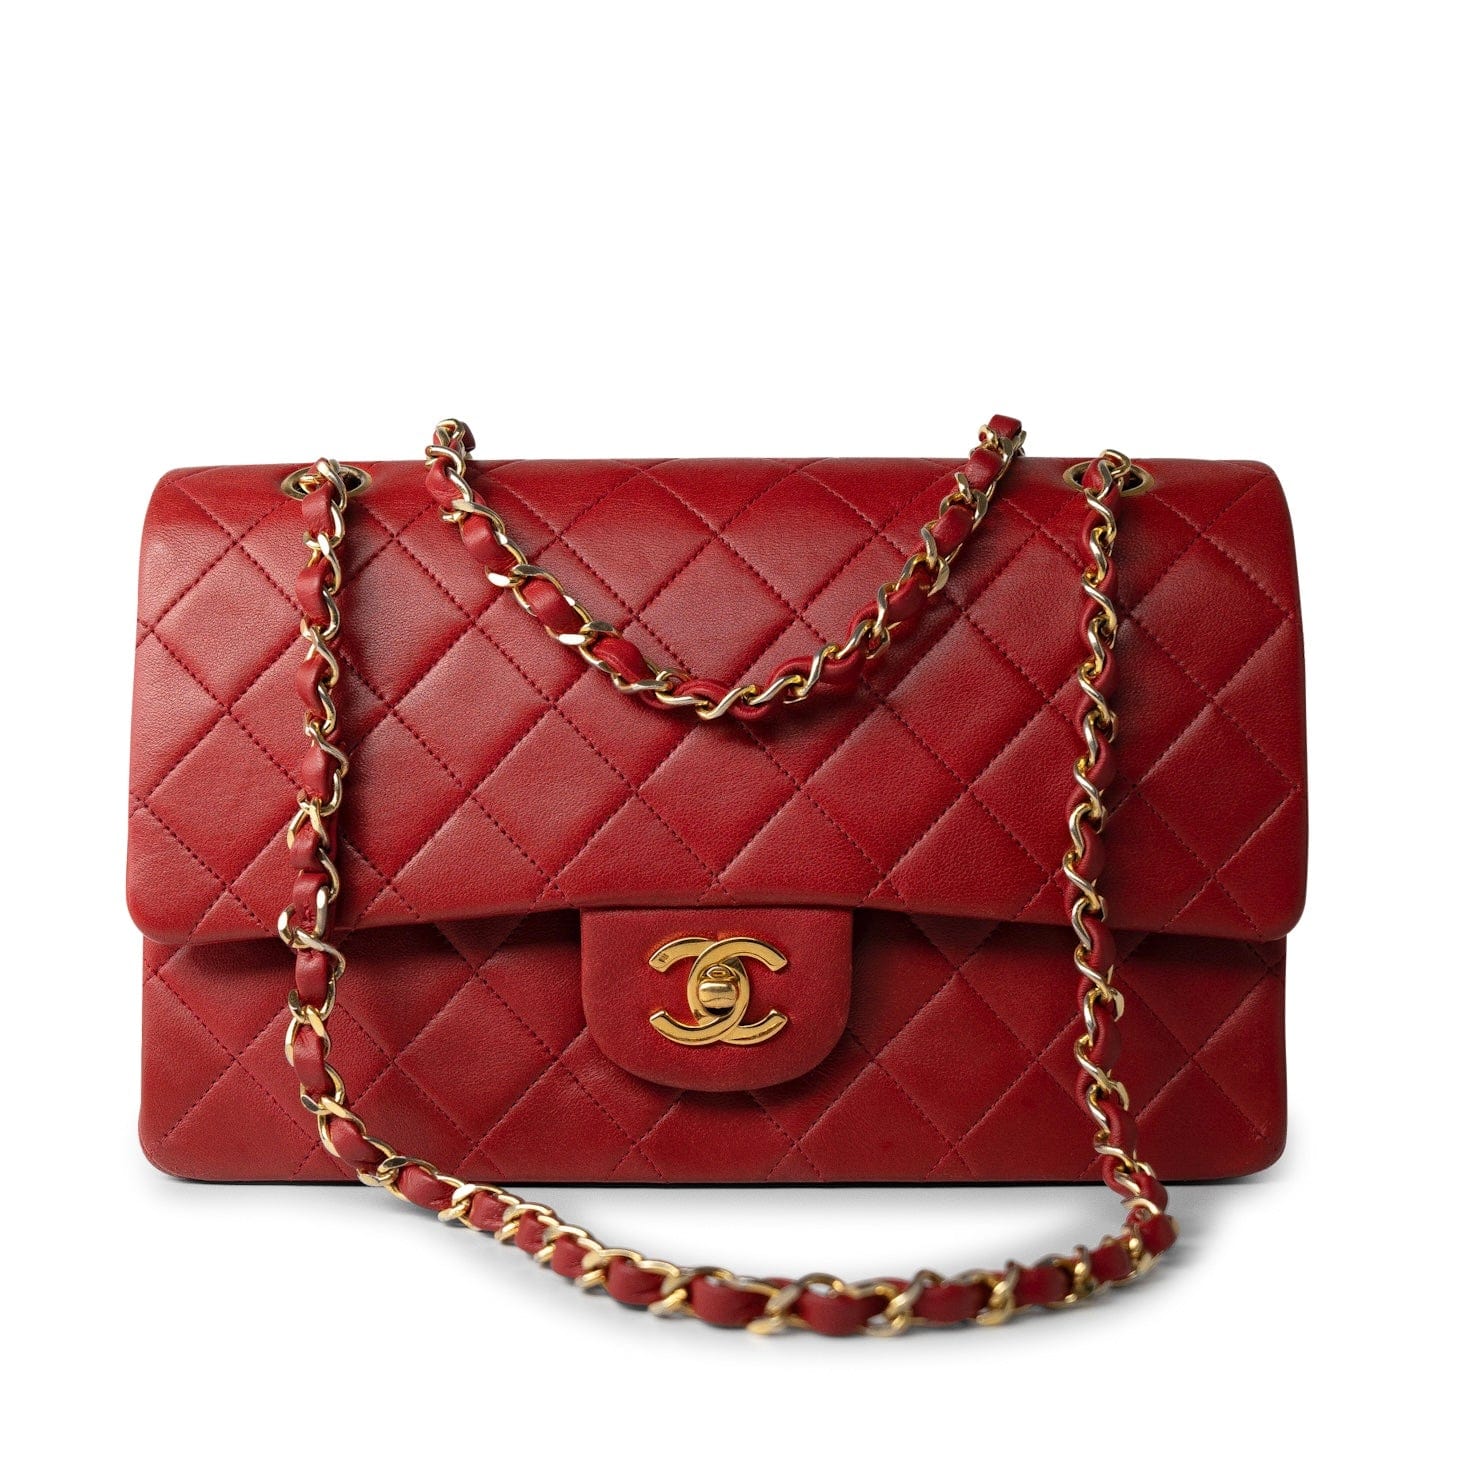 CHANEL Handbag Vintage Red Lambskin Quilted Classic Flap Medium Gold Hardware - Redeluxe